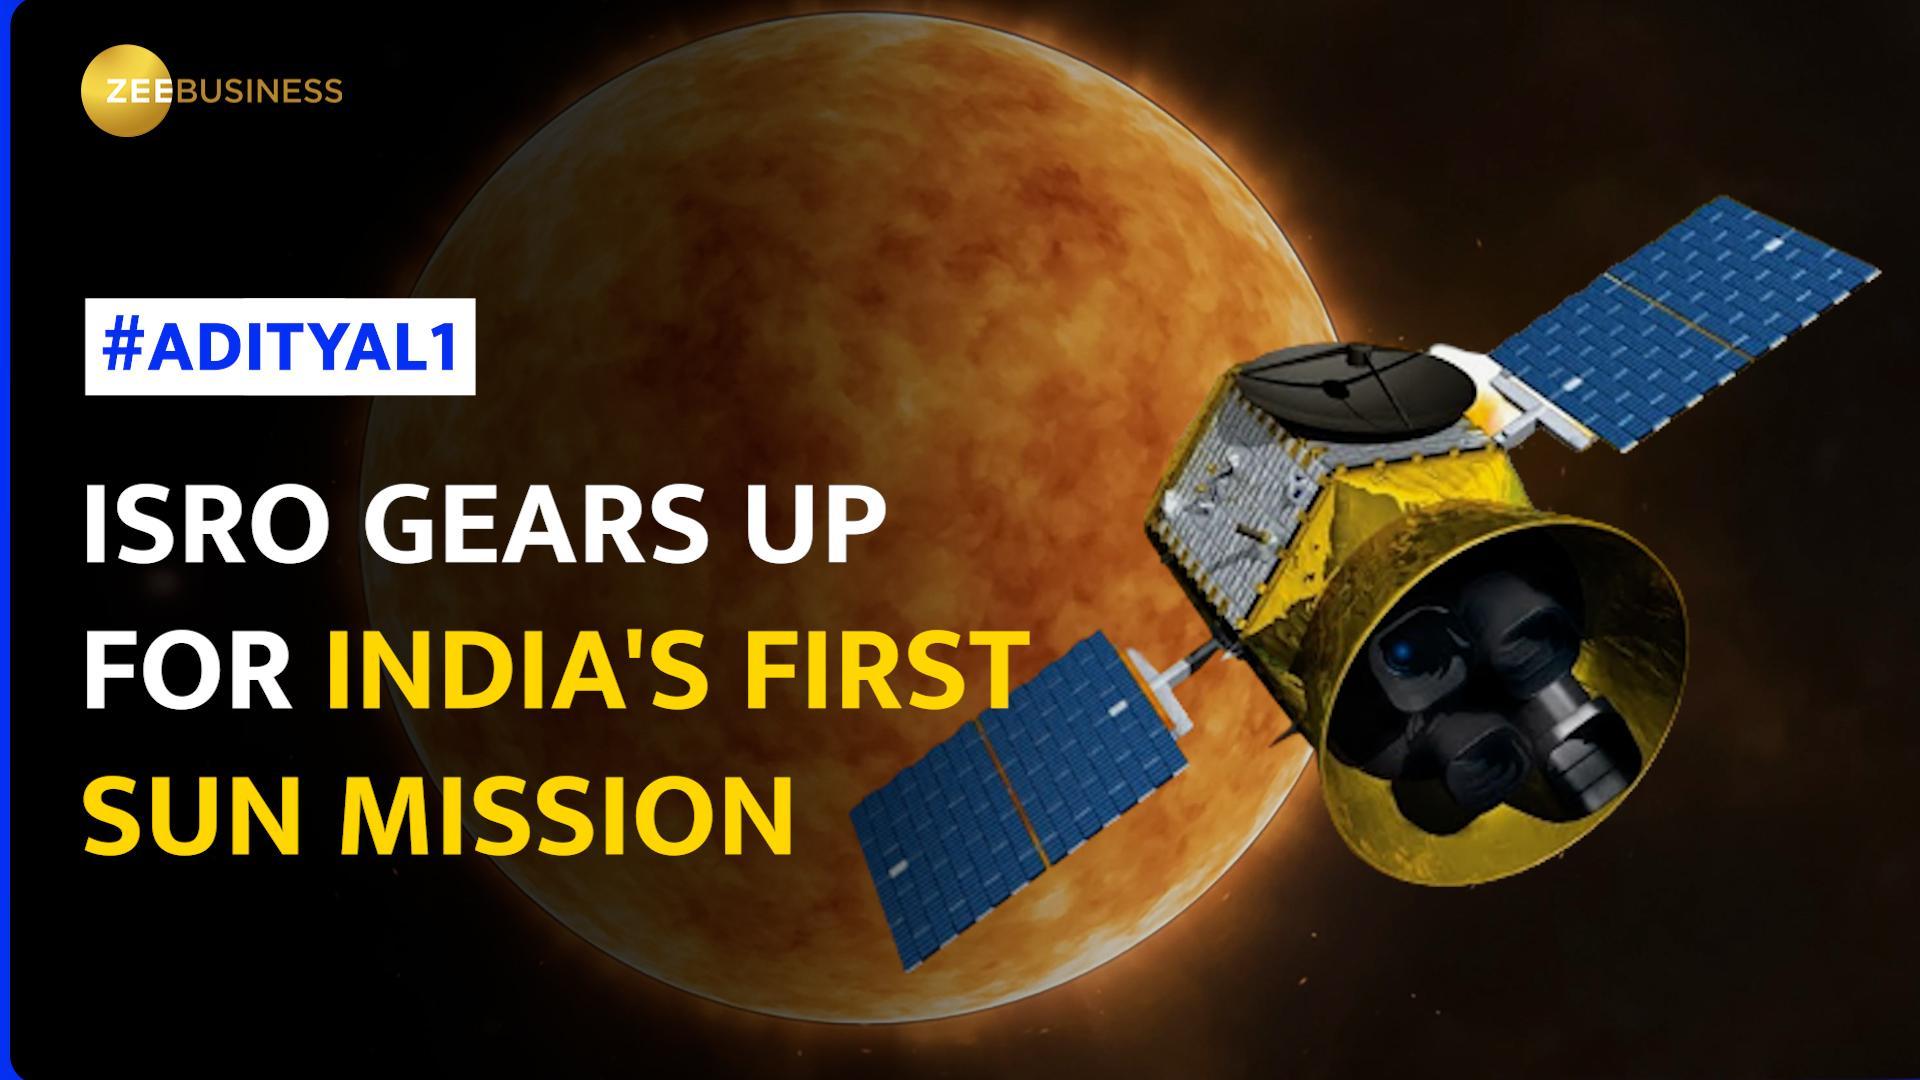 ISROs Aditya L1 mission to the sun, reaches spaceport: All You Need to Know